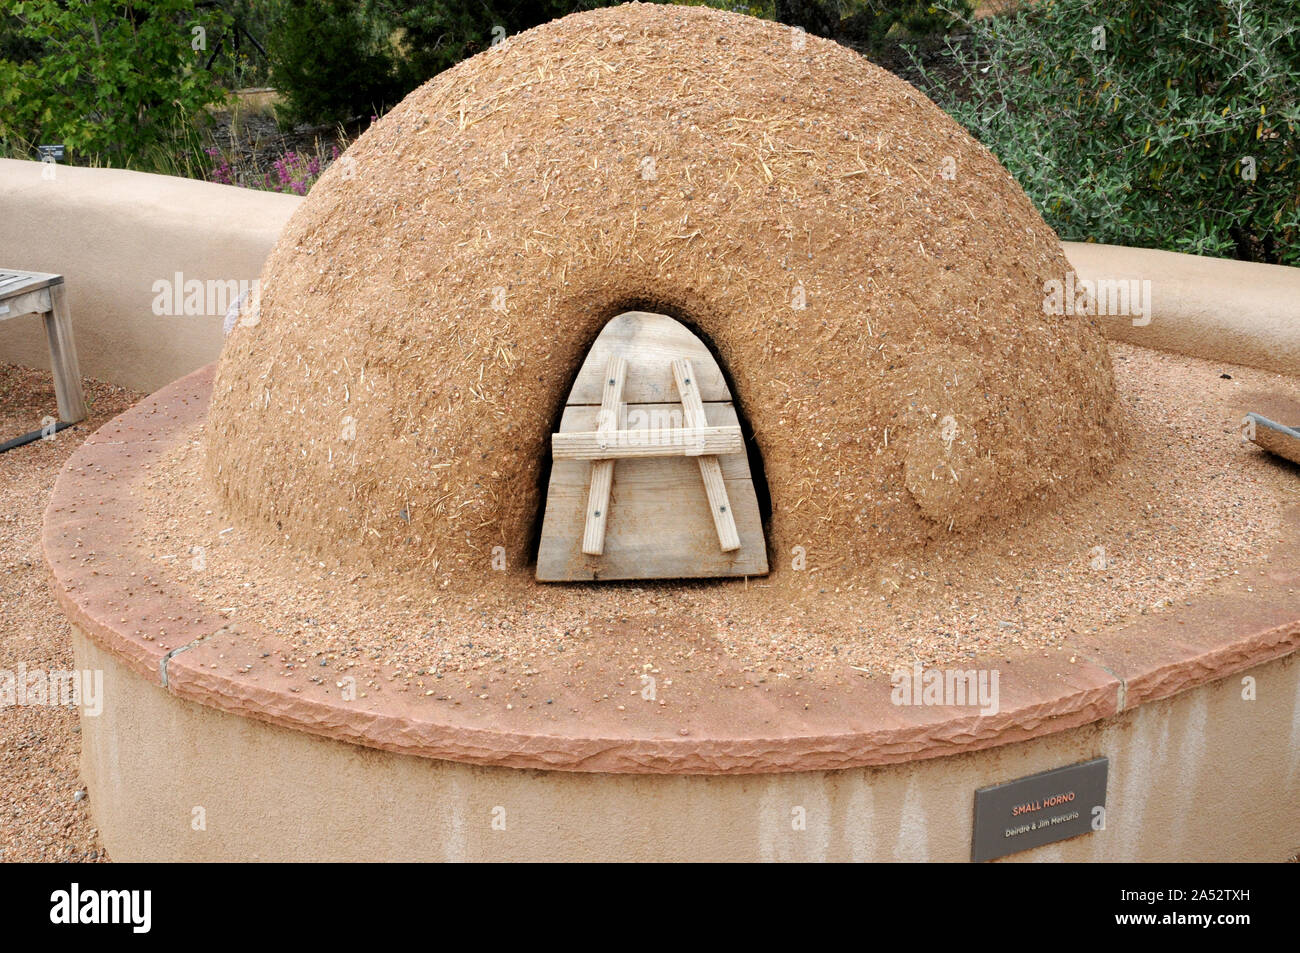 Native American ovens at Horno Plaza at the Santa Fe Botanical Gardens. The ovens are part of the crops and cooking demonstrations in the garden. Stock Photo